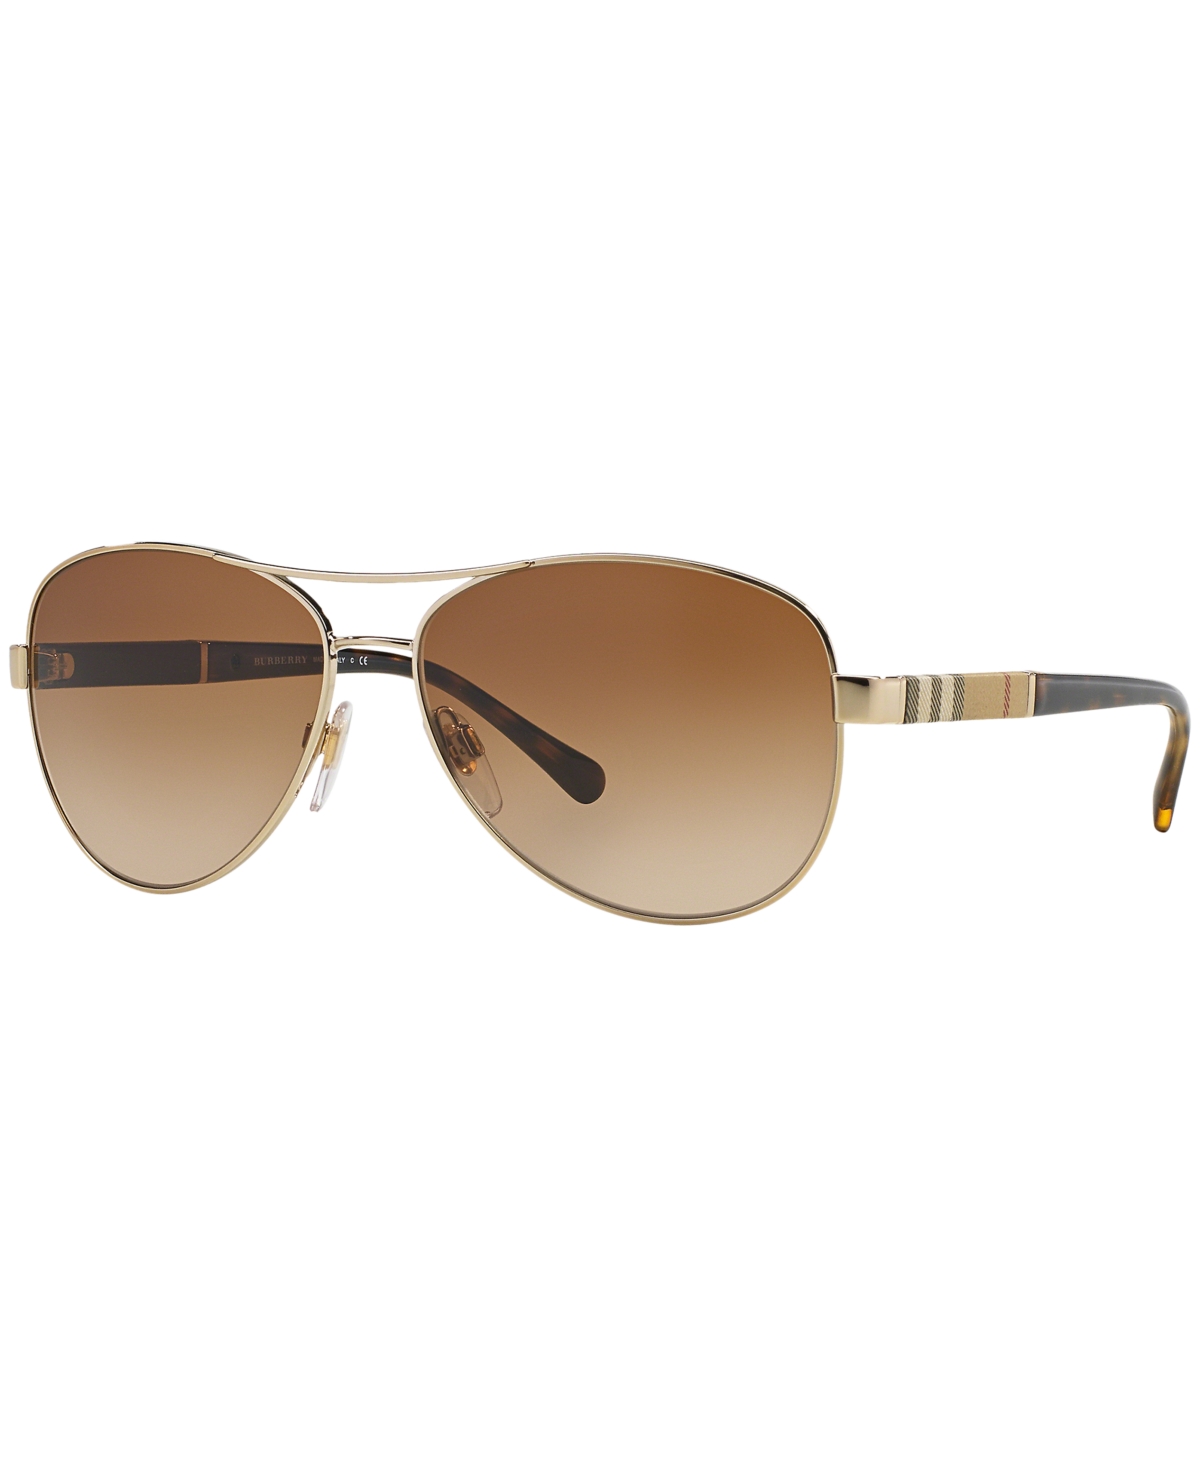 Burberry Polarized Sunglasses , Be3080 In Gold Light,brown Gradient Polar